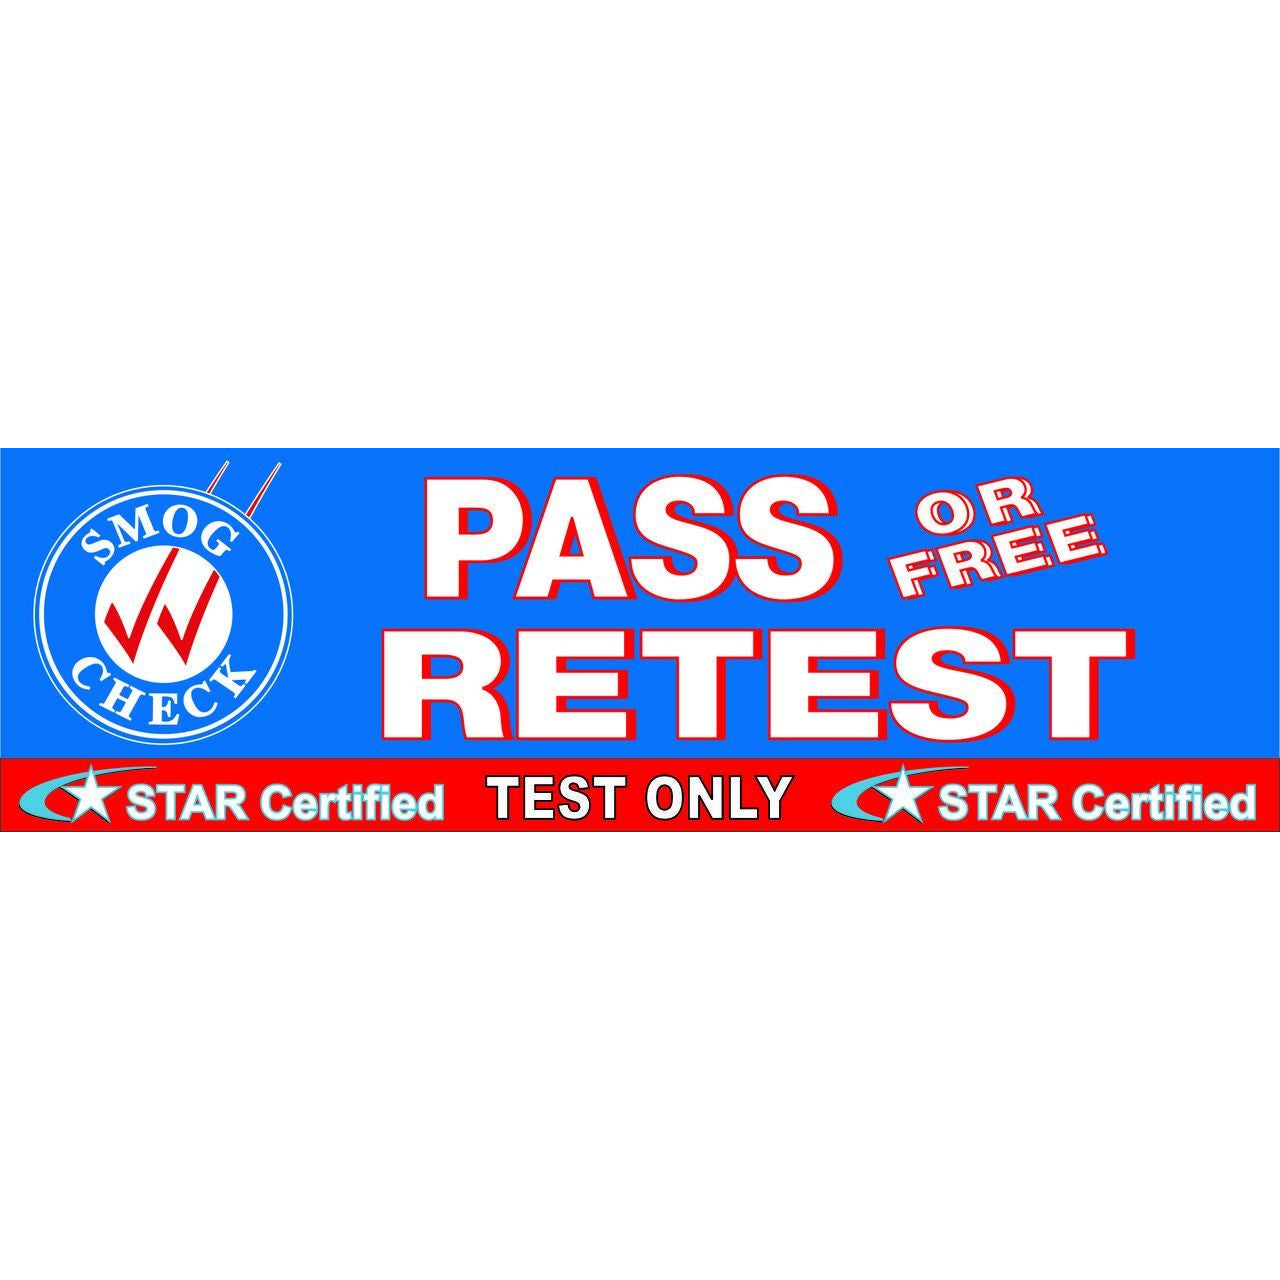 STAR CERTIFIED TEST ONLY PASS / FREE RETEST BANNER  SB942 !!!